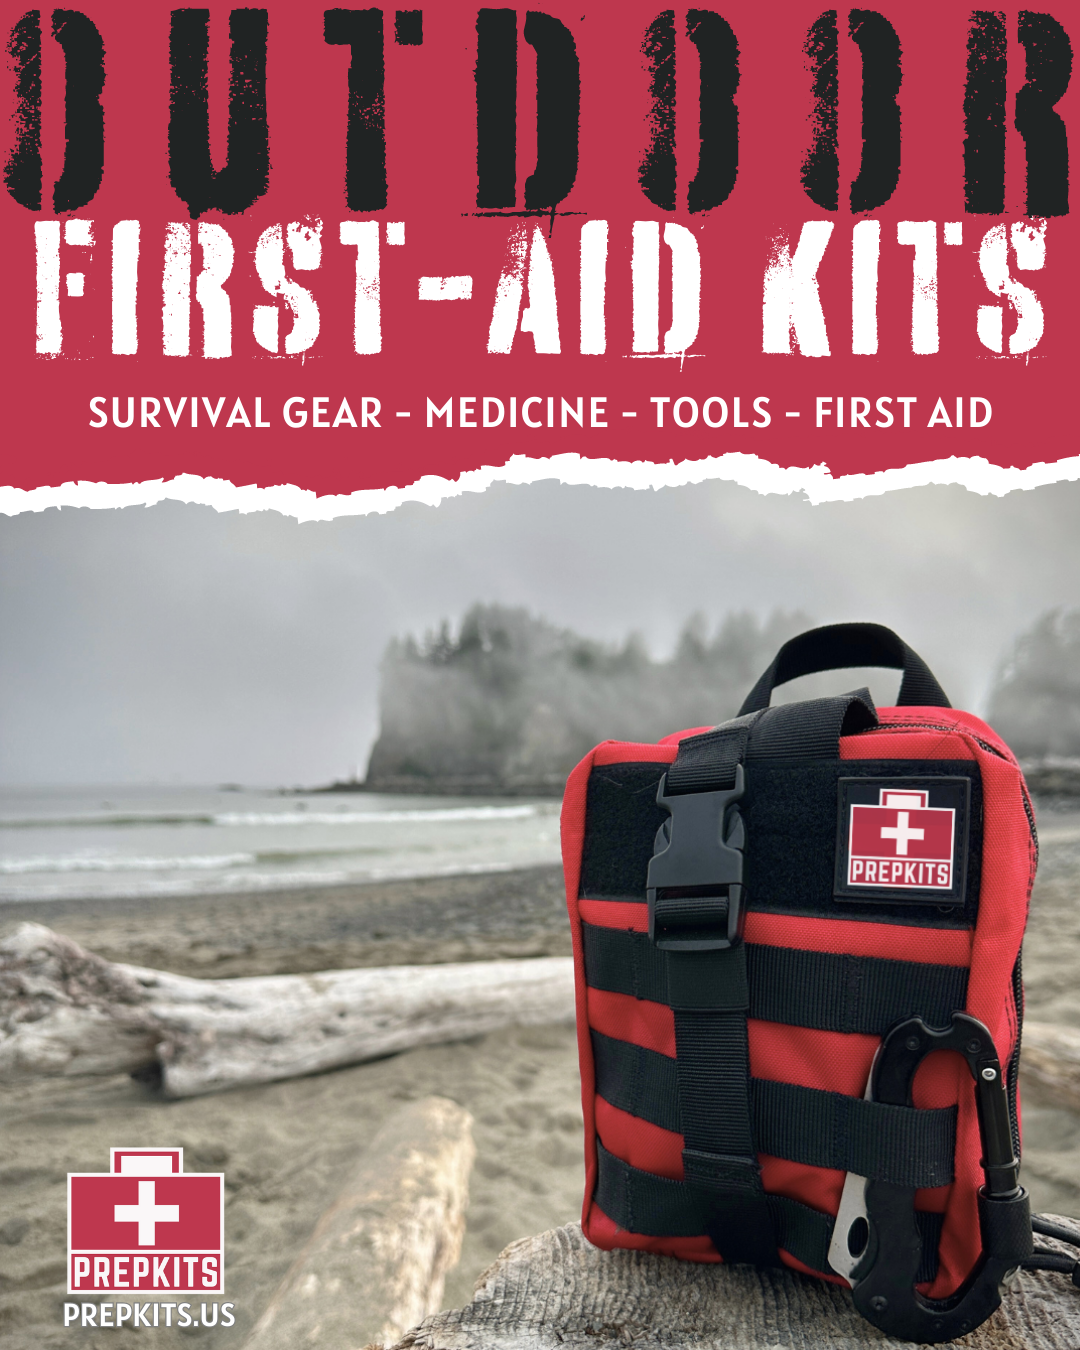 Prepkits outdoor firstaid kits